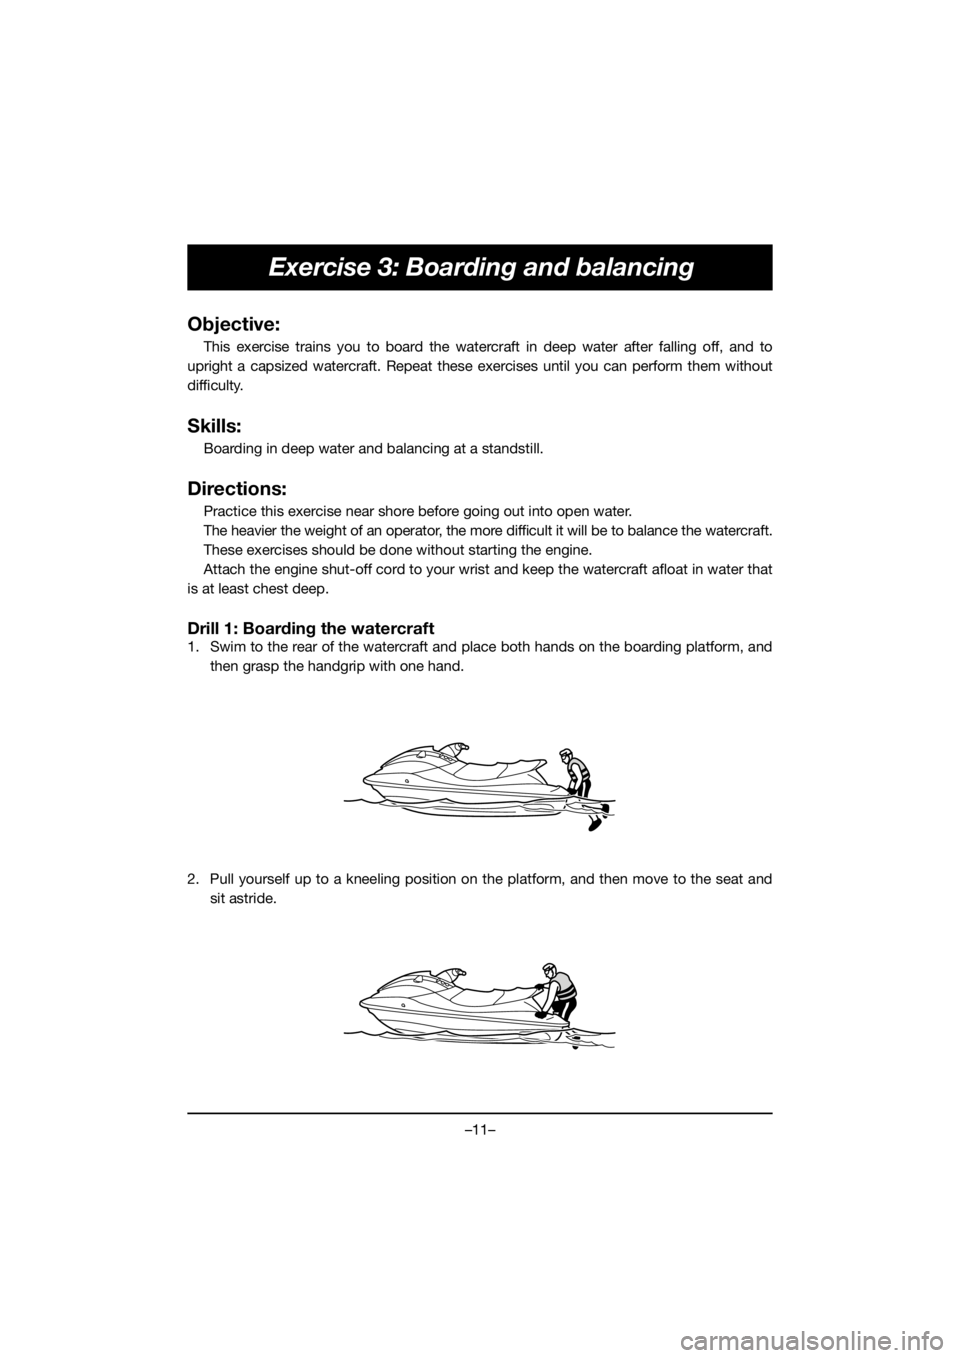 YAMAHA VX DELUXE 2019  Manuale de Empleo (in Spanish) –11–
Exercise 3: Boarding and balancing
Objective:
This exercise trains you to board the watercraft in deep water after falling off, and to
upright a capsized watercraft. Repeat these exercises un